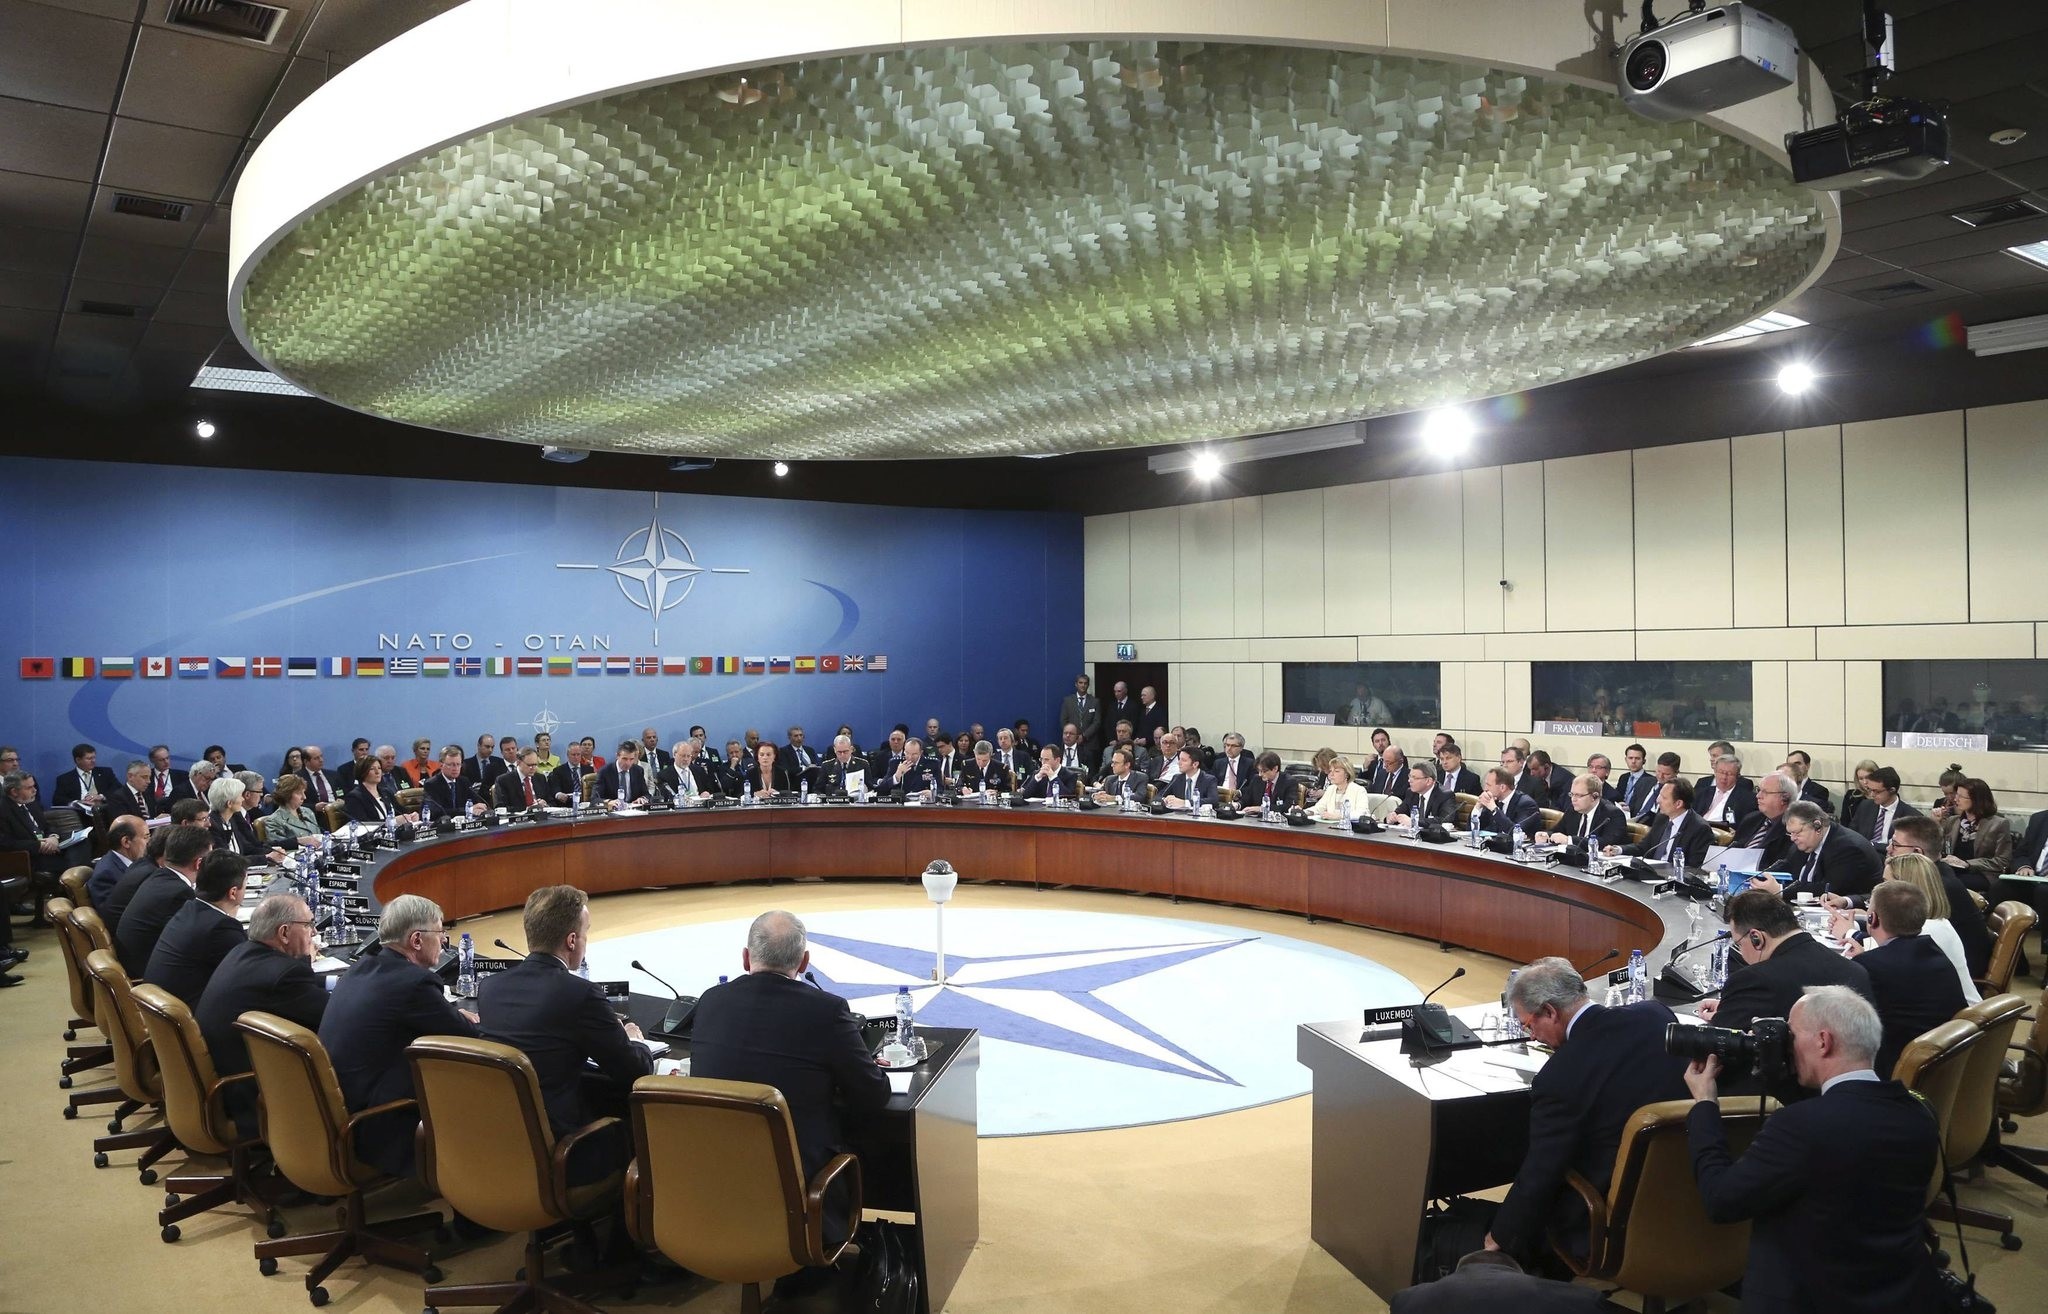 NATO Secretary General Anders Fogh Rasmussen chairs a NATO foreign ministers meeting at the Alliance headquarters in Brussels April 1, 2014 (Reuters Photo)